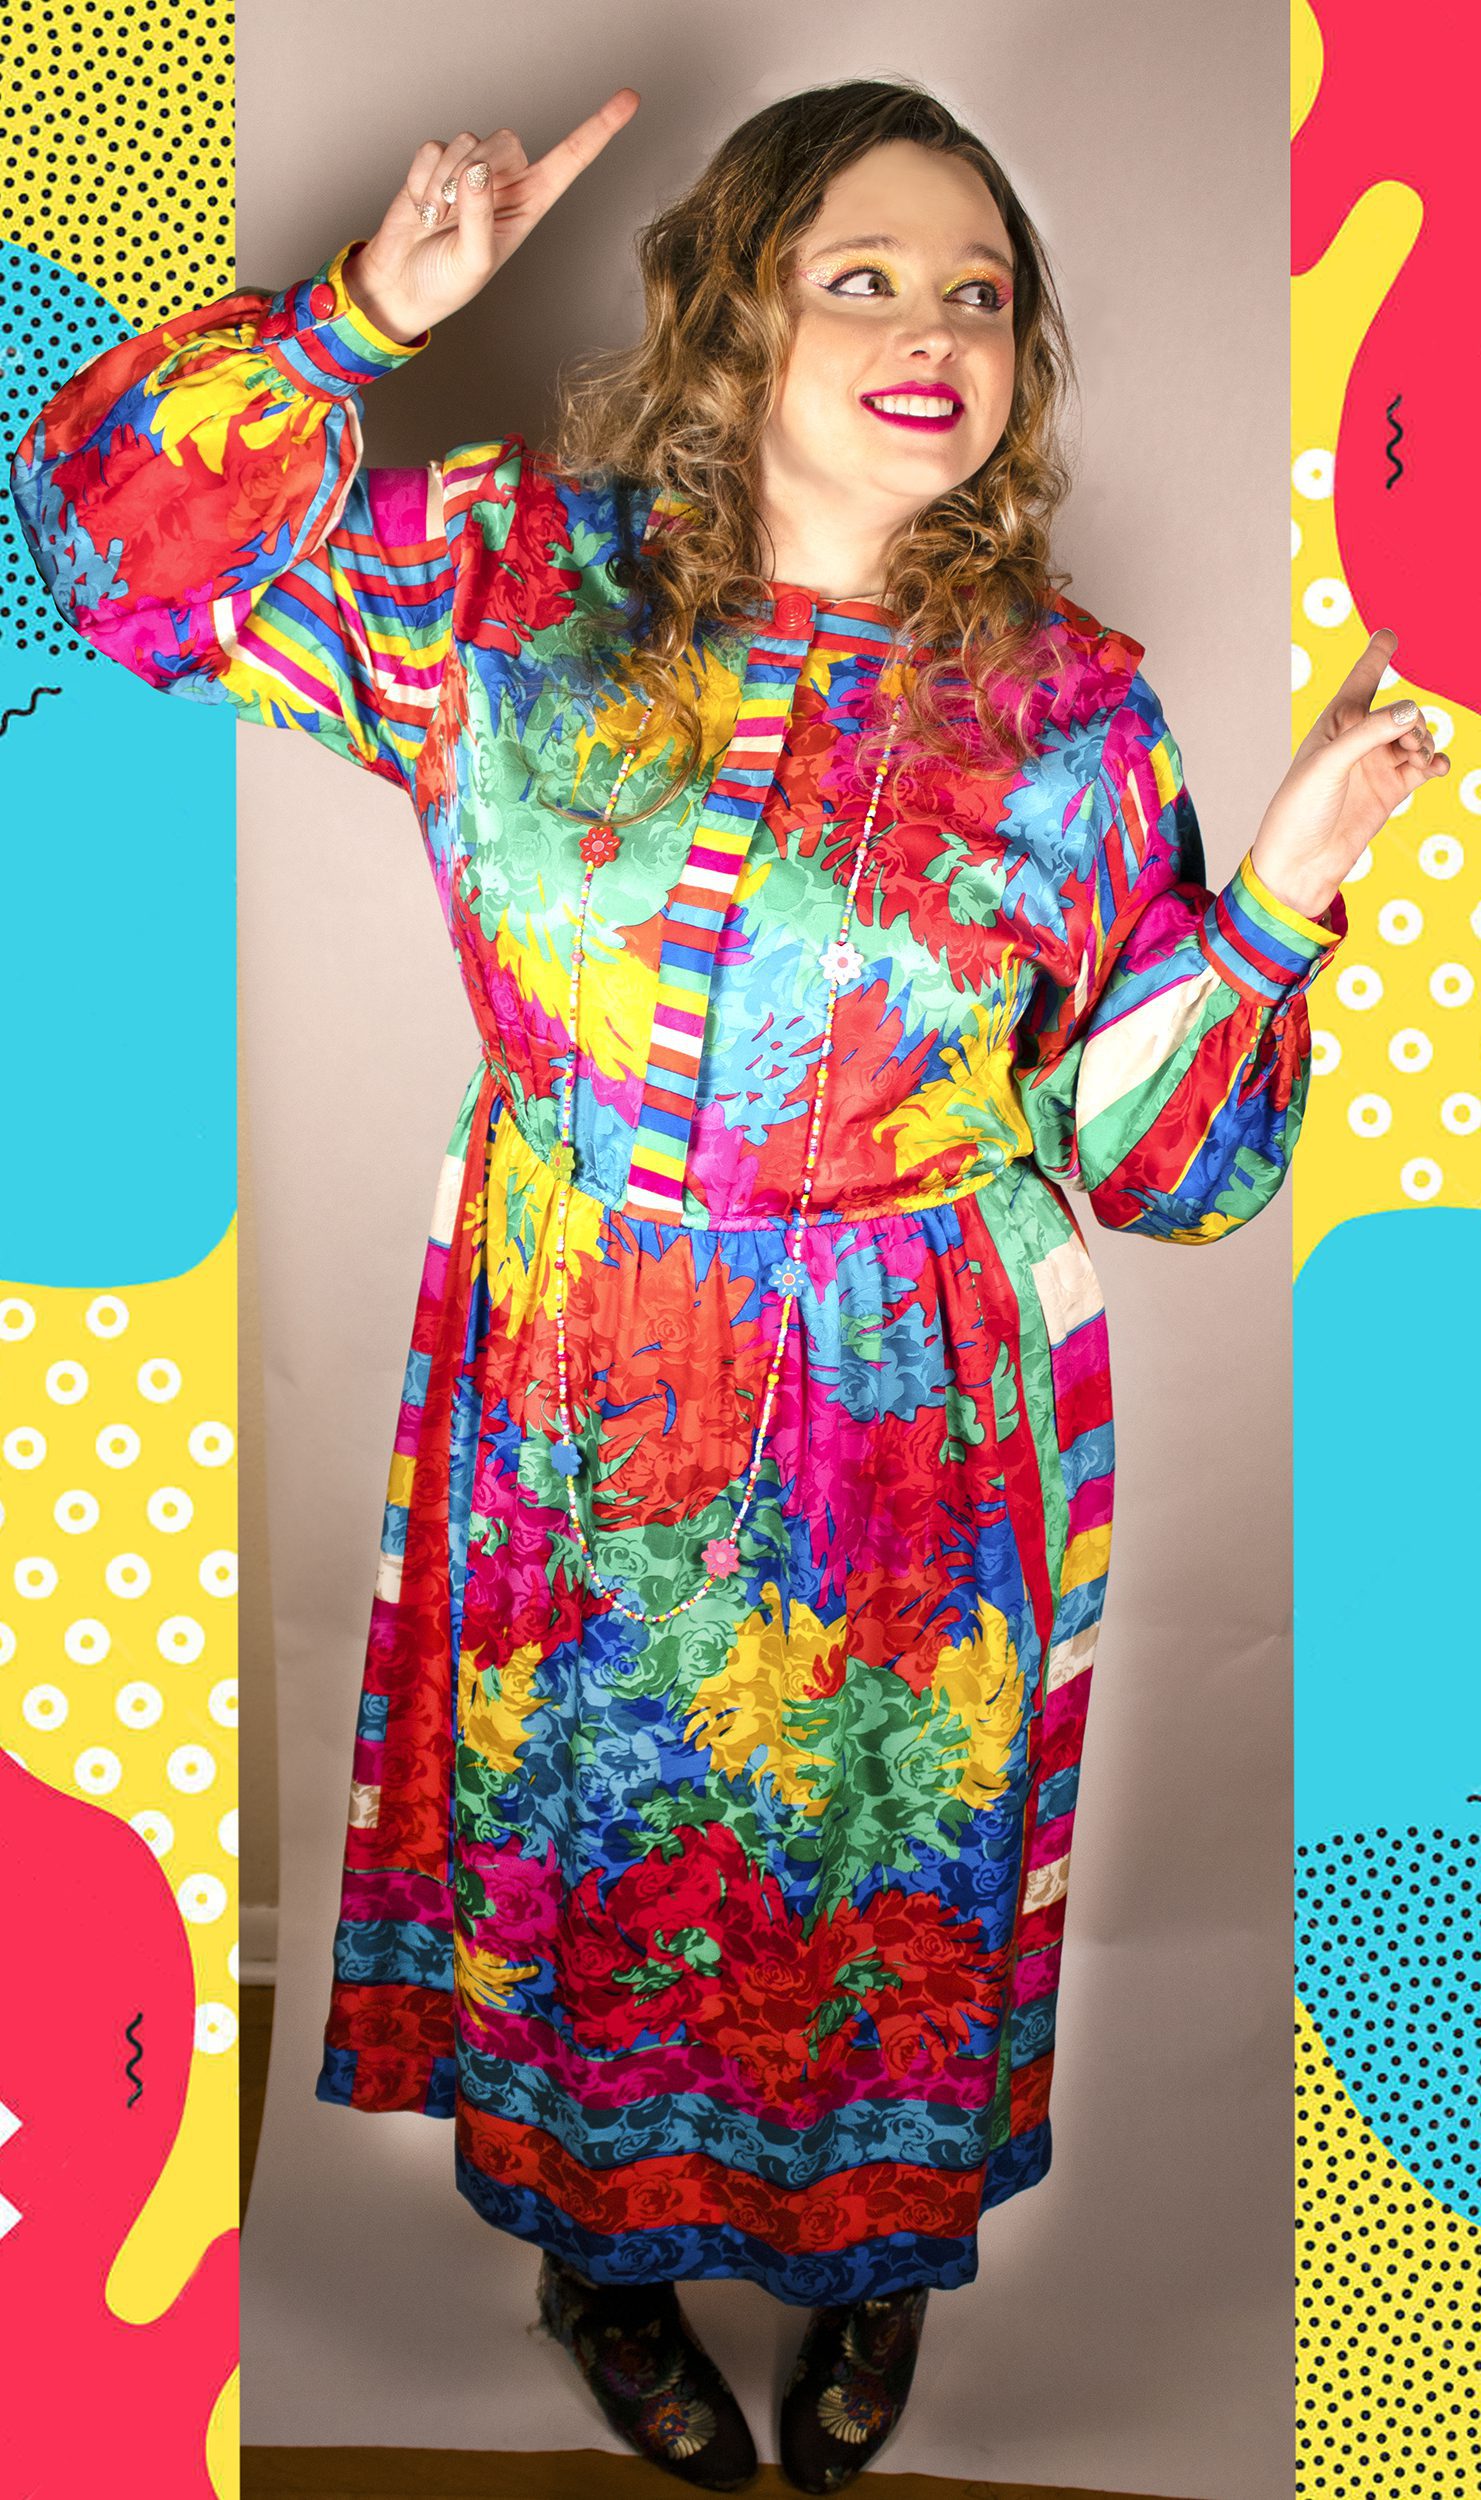 Right facing full body photo of Artist Chelsea Smith smiling while looking and pointing with both hands to the right. Chelsea is wearing a brightly colored dress and makeup along with a bright 80s inspired design background